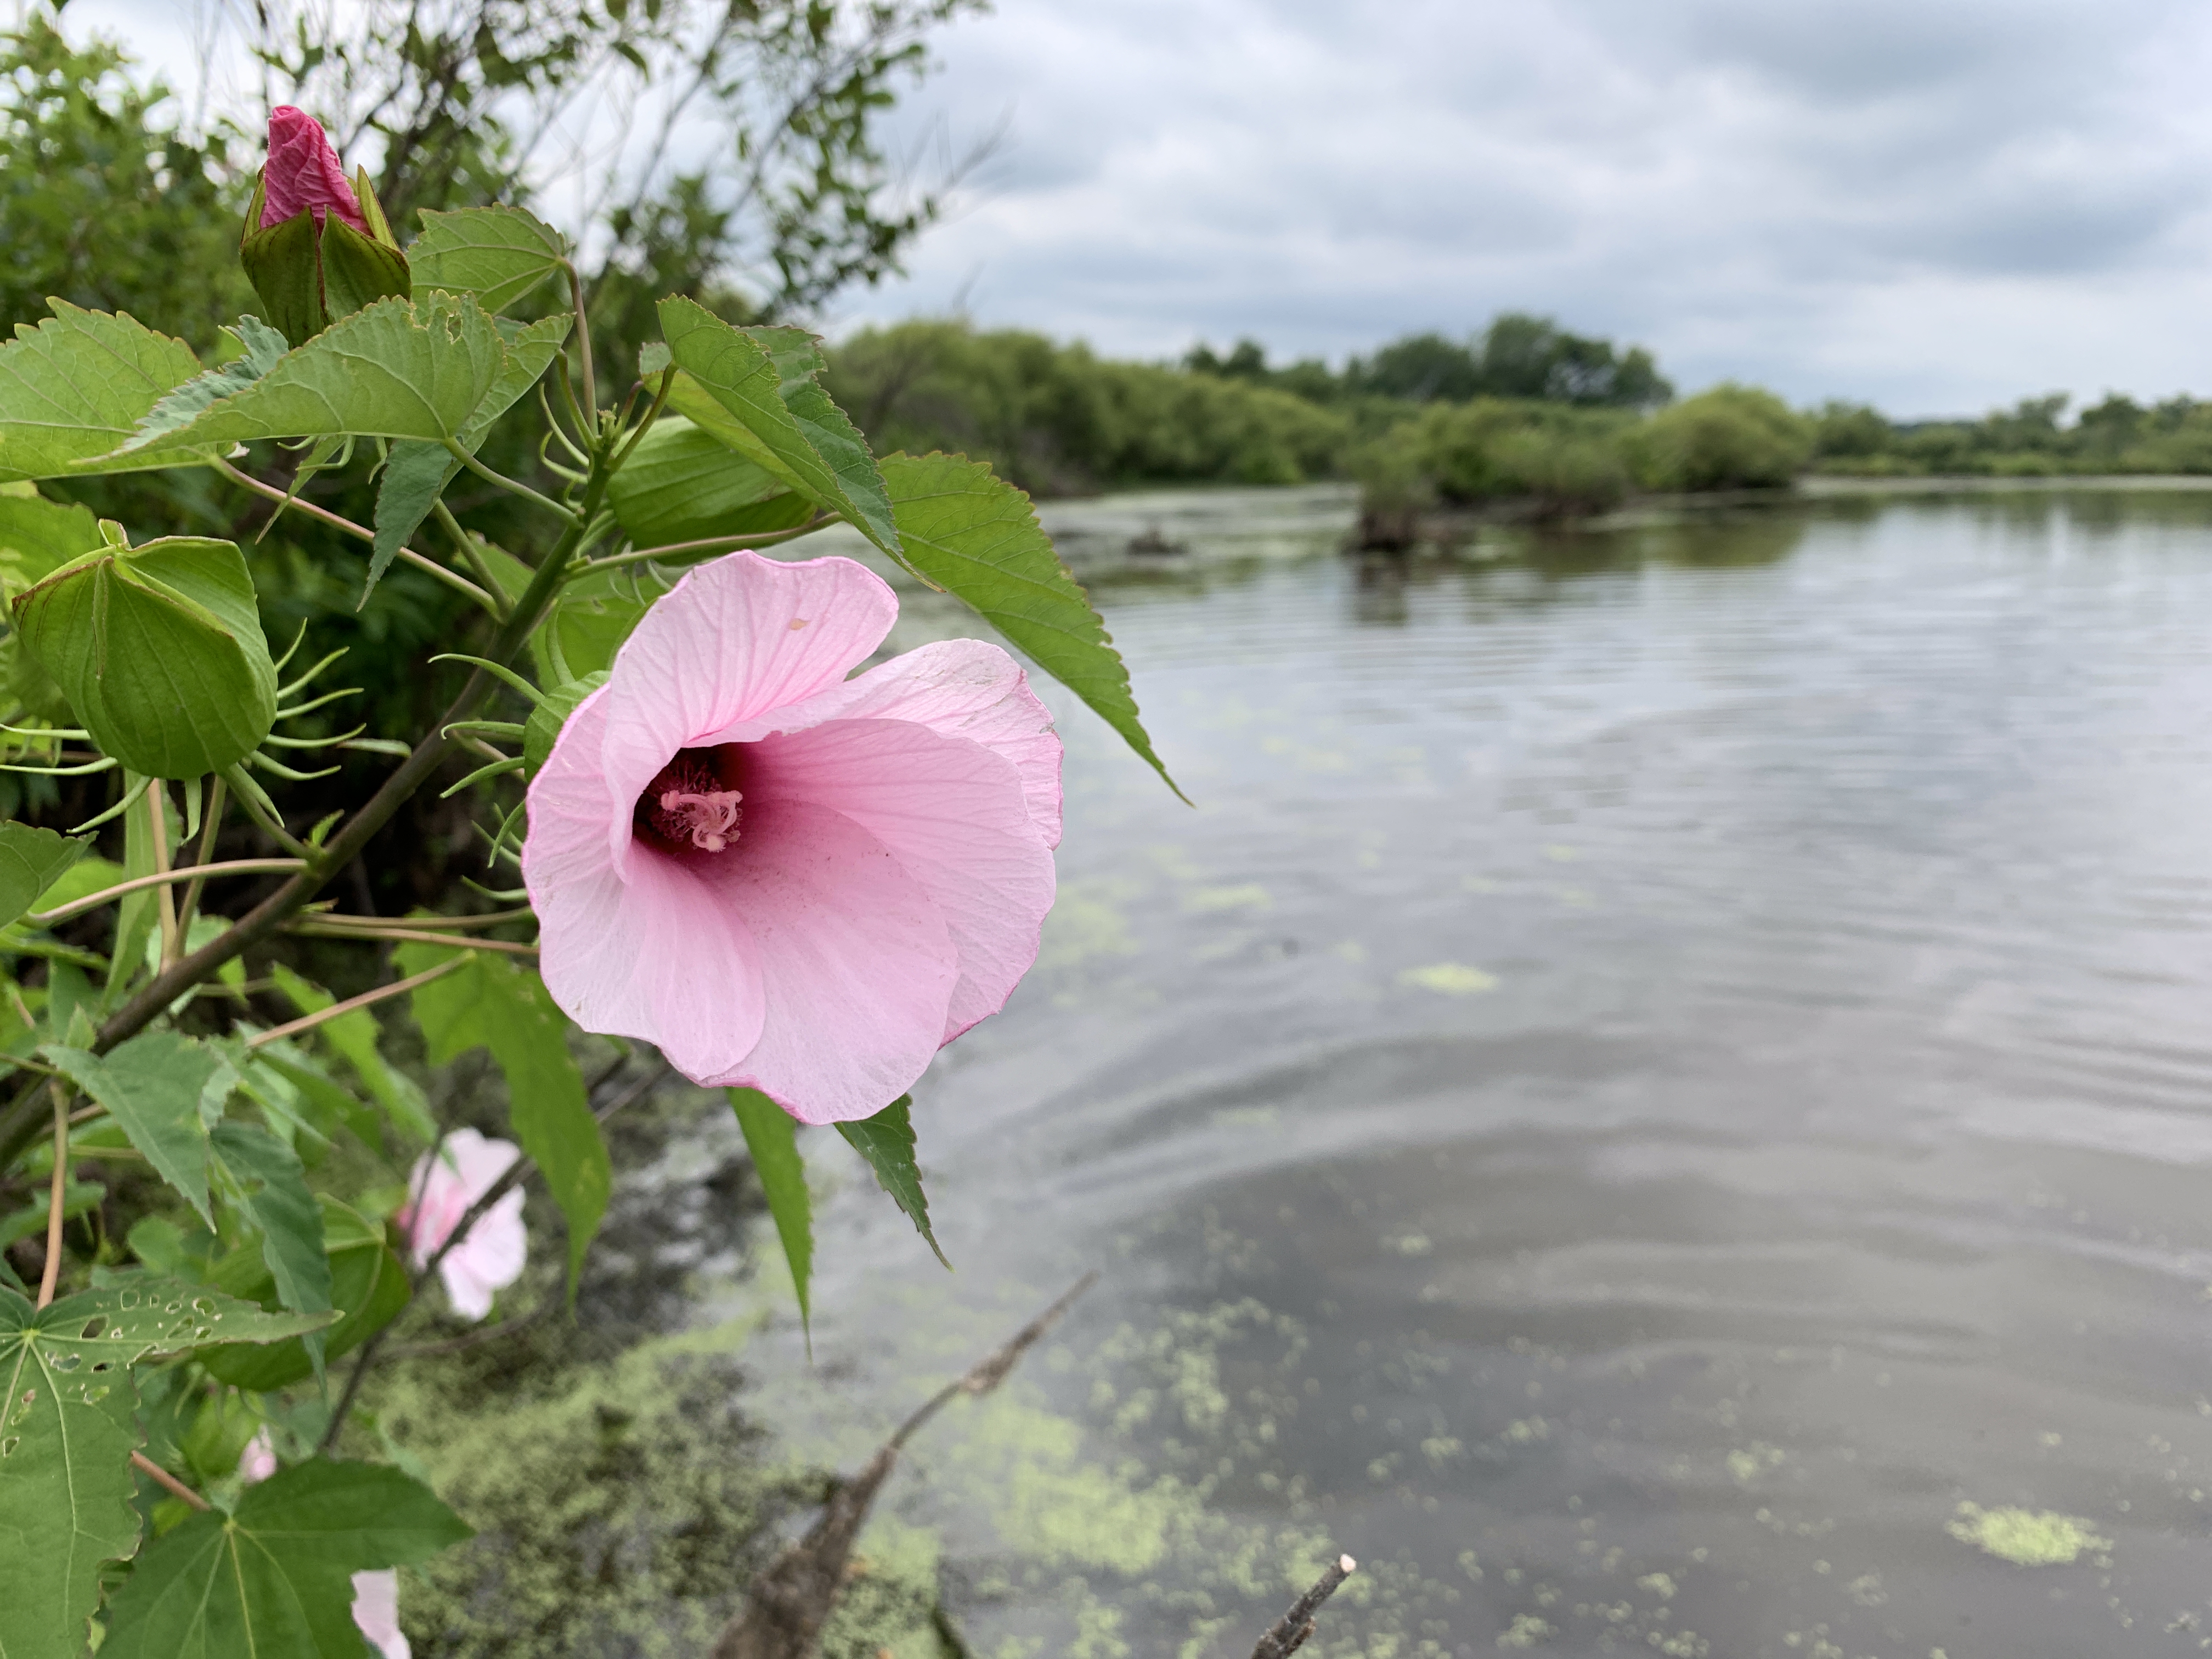 Rose Mallow (Hibiscus moscheutos or Hibiscus palustris) foudn growing in a wetland complex along the Cedar River in northeast Johnson County